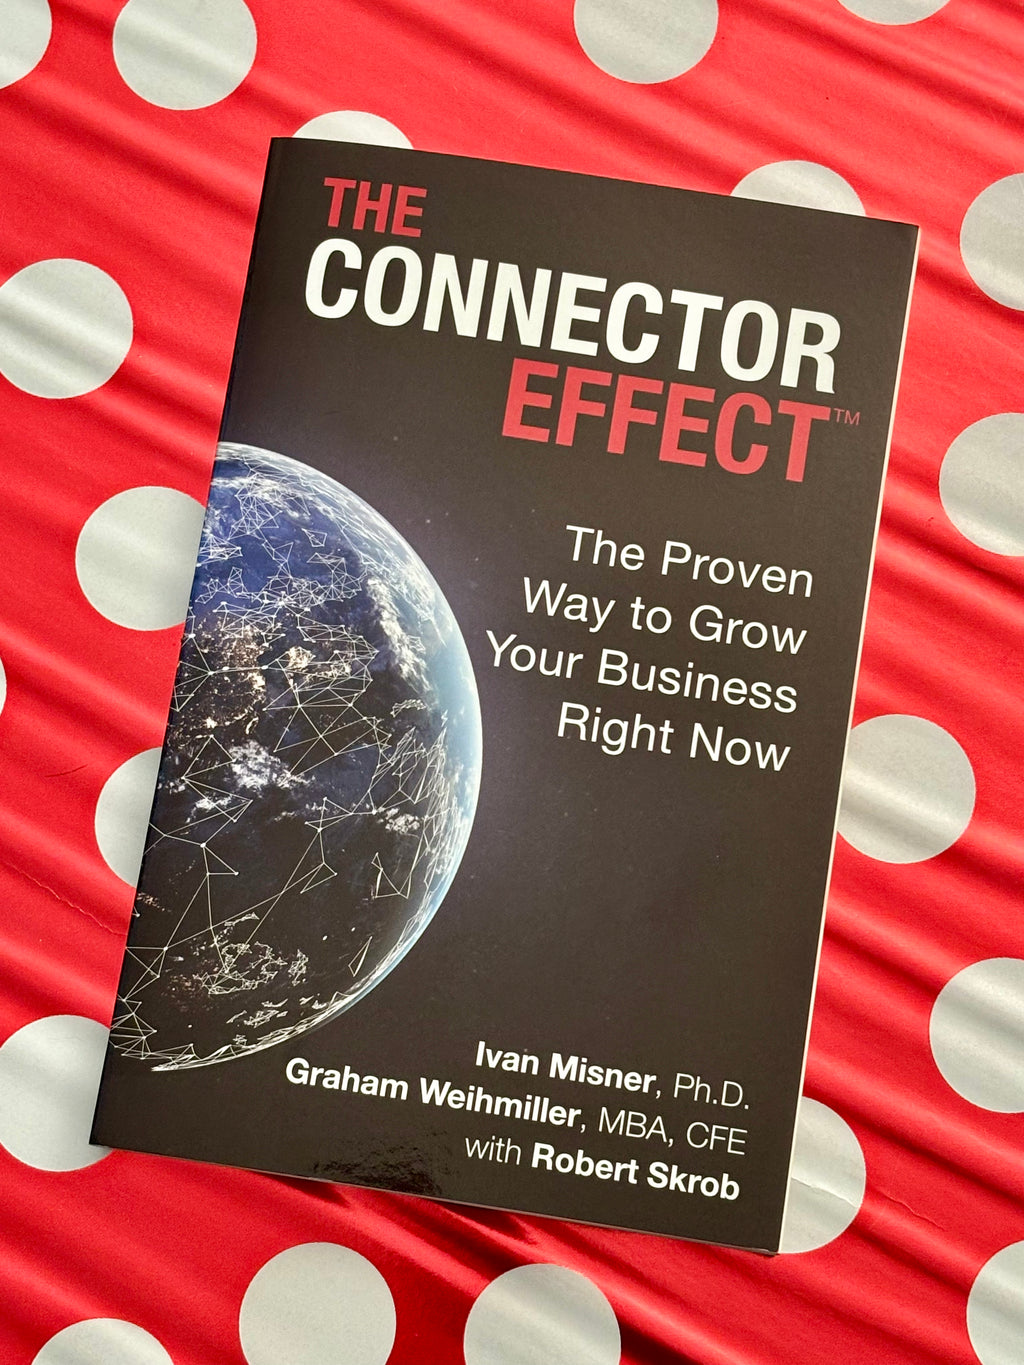 The Connector Effect: The Proven Way to Grow Your Business Right Now- By Ivan Misner, Ph.D, Graham Weihmiller, MBA, CFE, and Rober Skrob